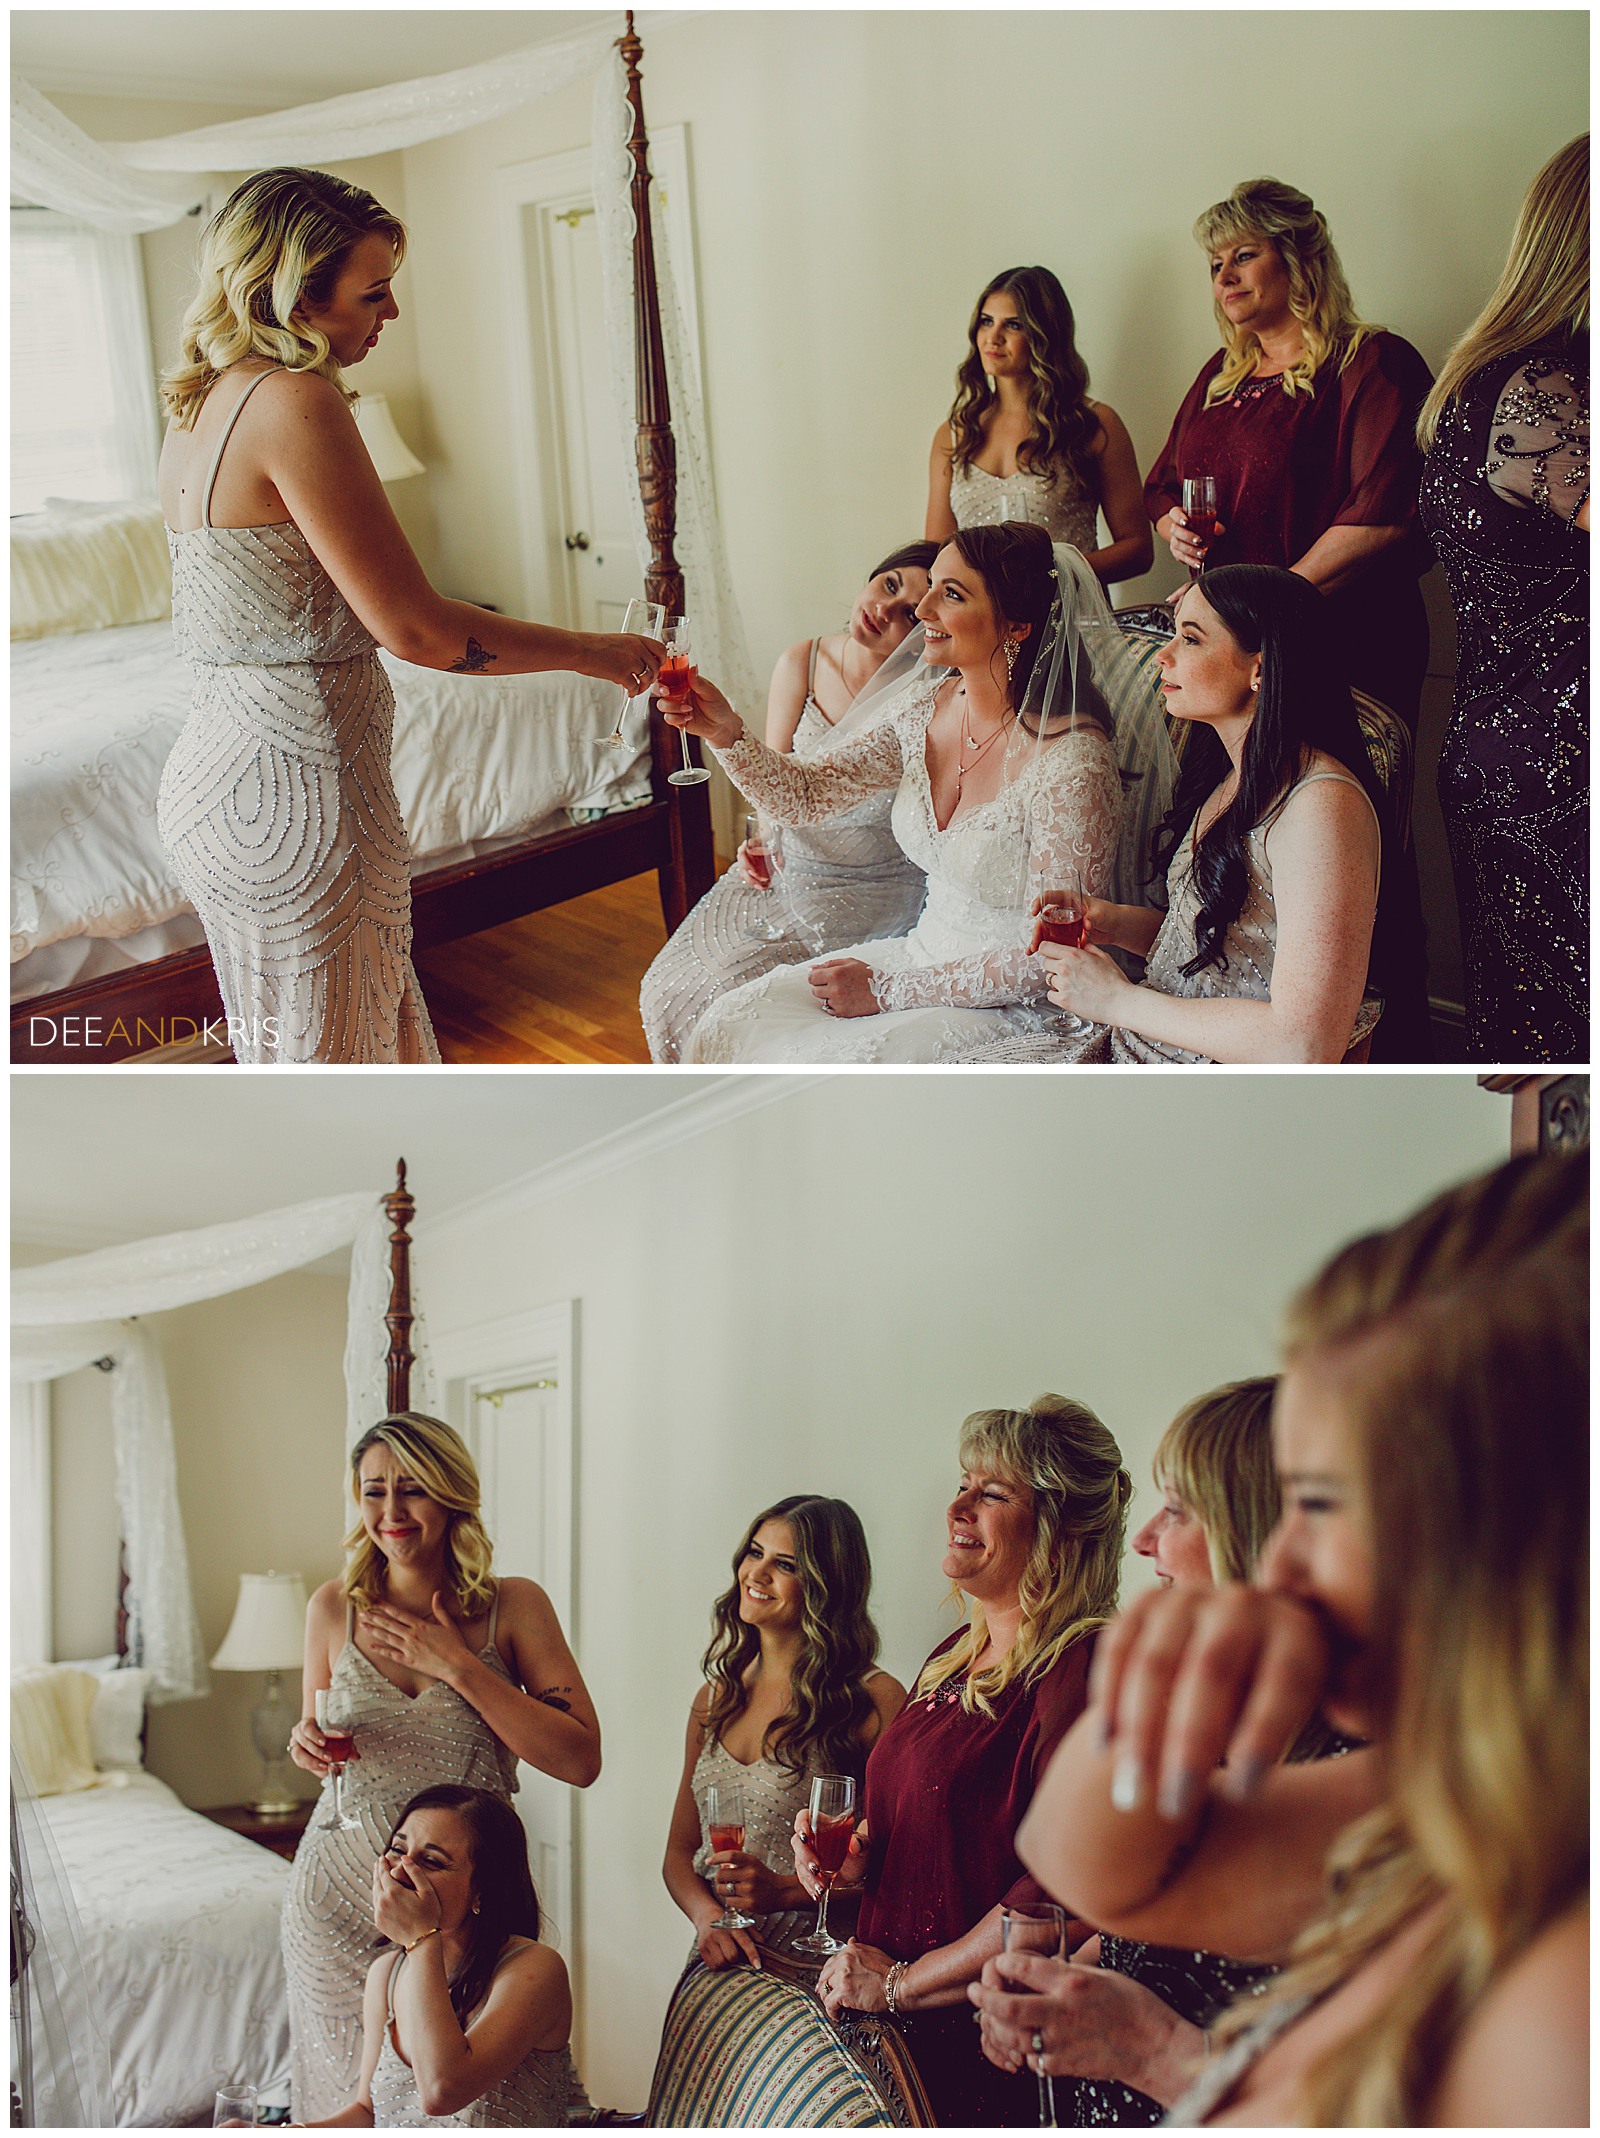 Monte Verde Inn Photos in Bridal suite, bride getting ready, dee and kris photography, champagne toast